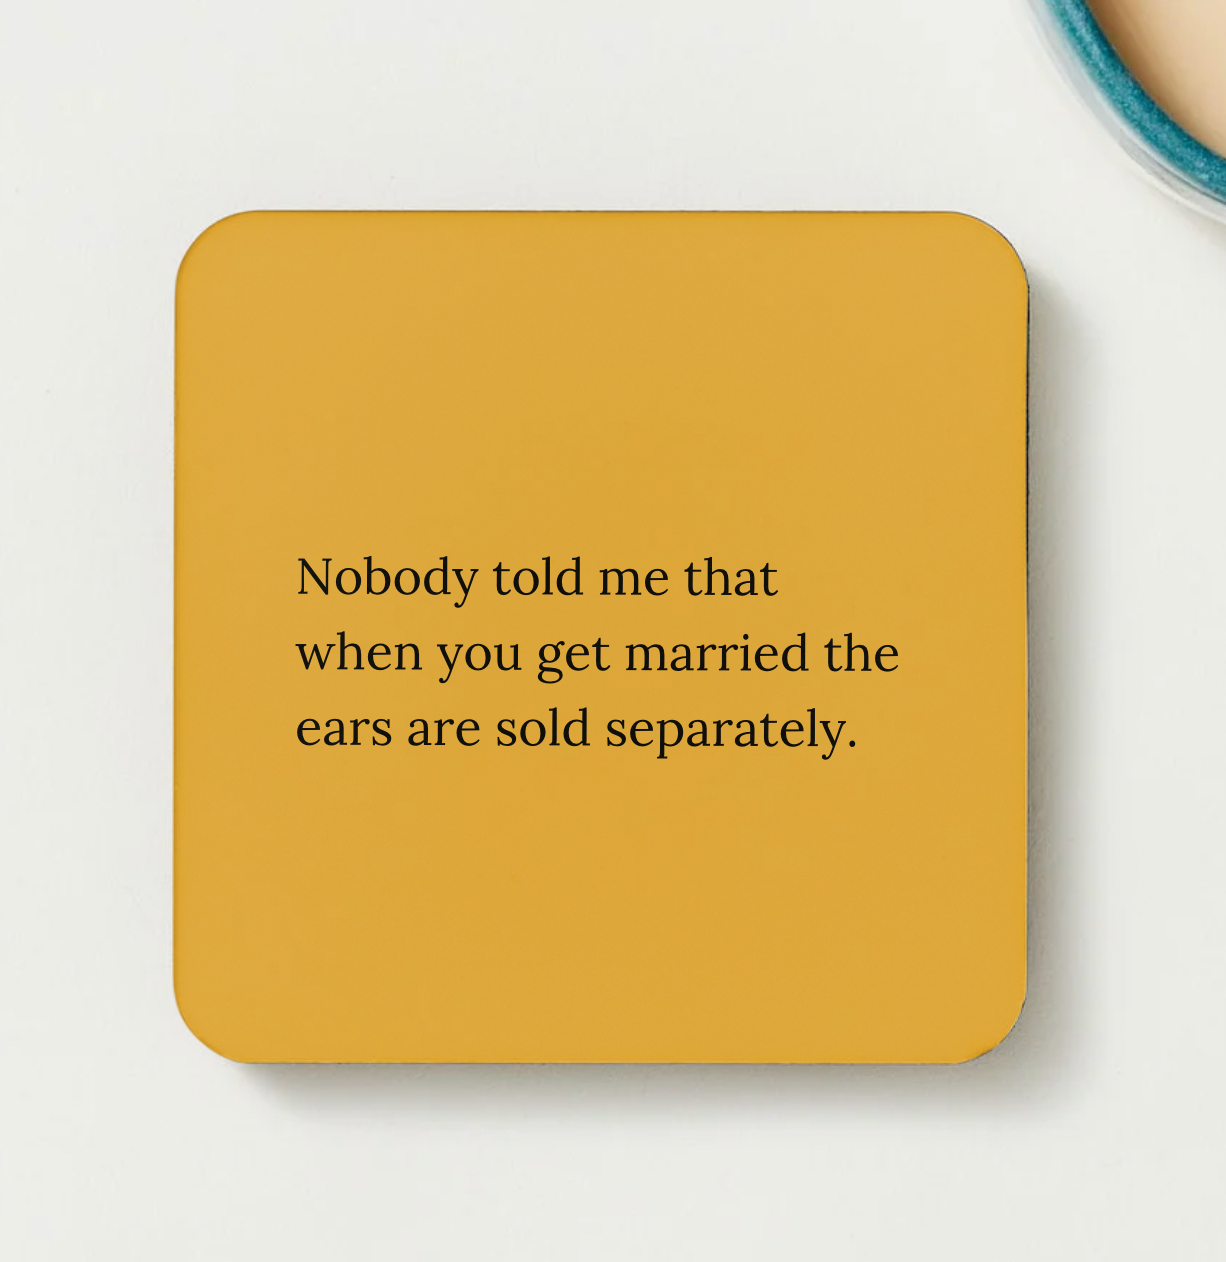 Nobody told me that when you get married the ears are sold separately - funny coaster